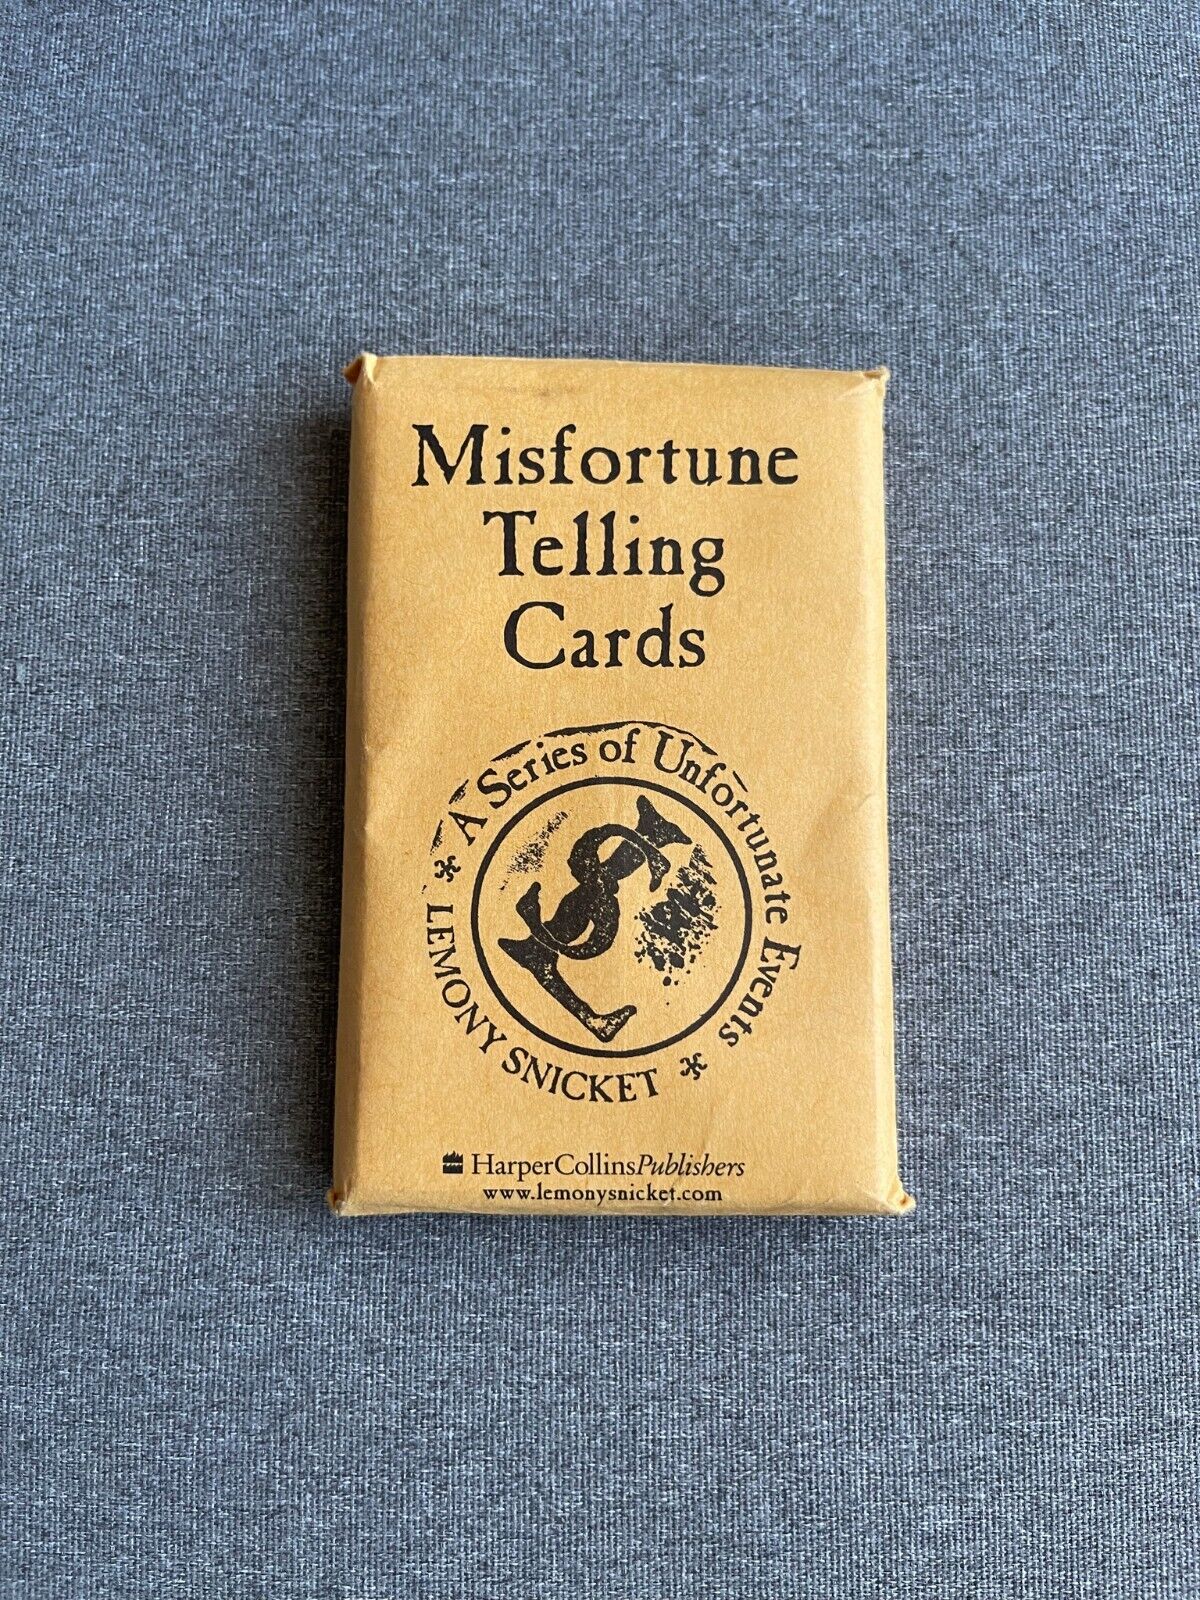 Series of Unfortunate Events Misfortune Telling Cards Lemony Snicket Promotional